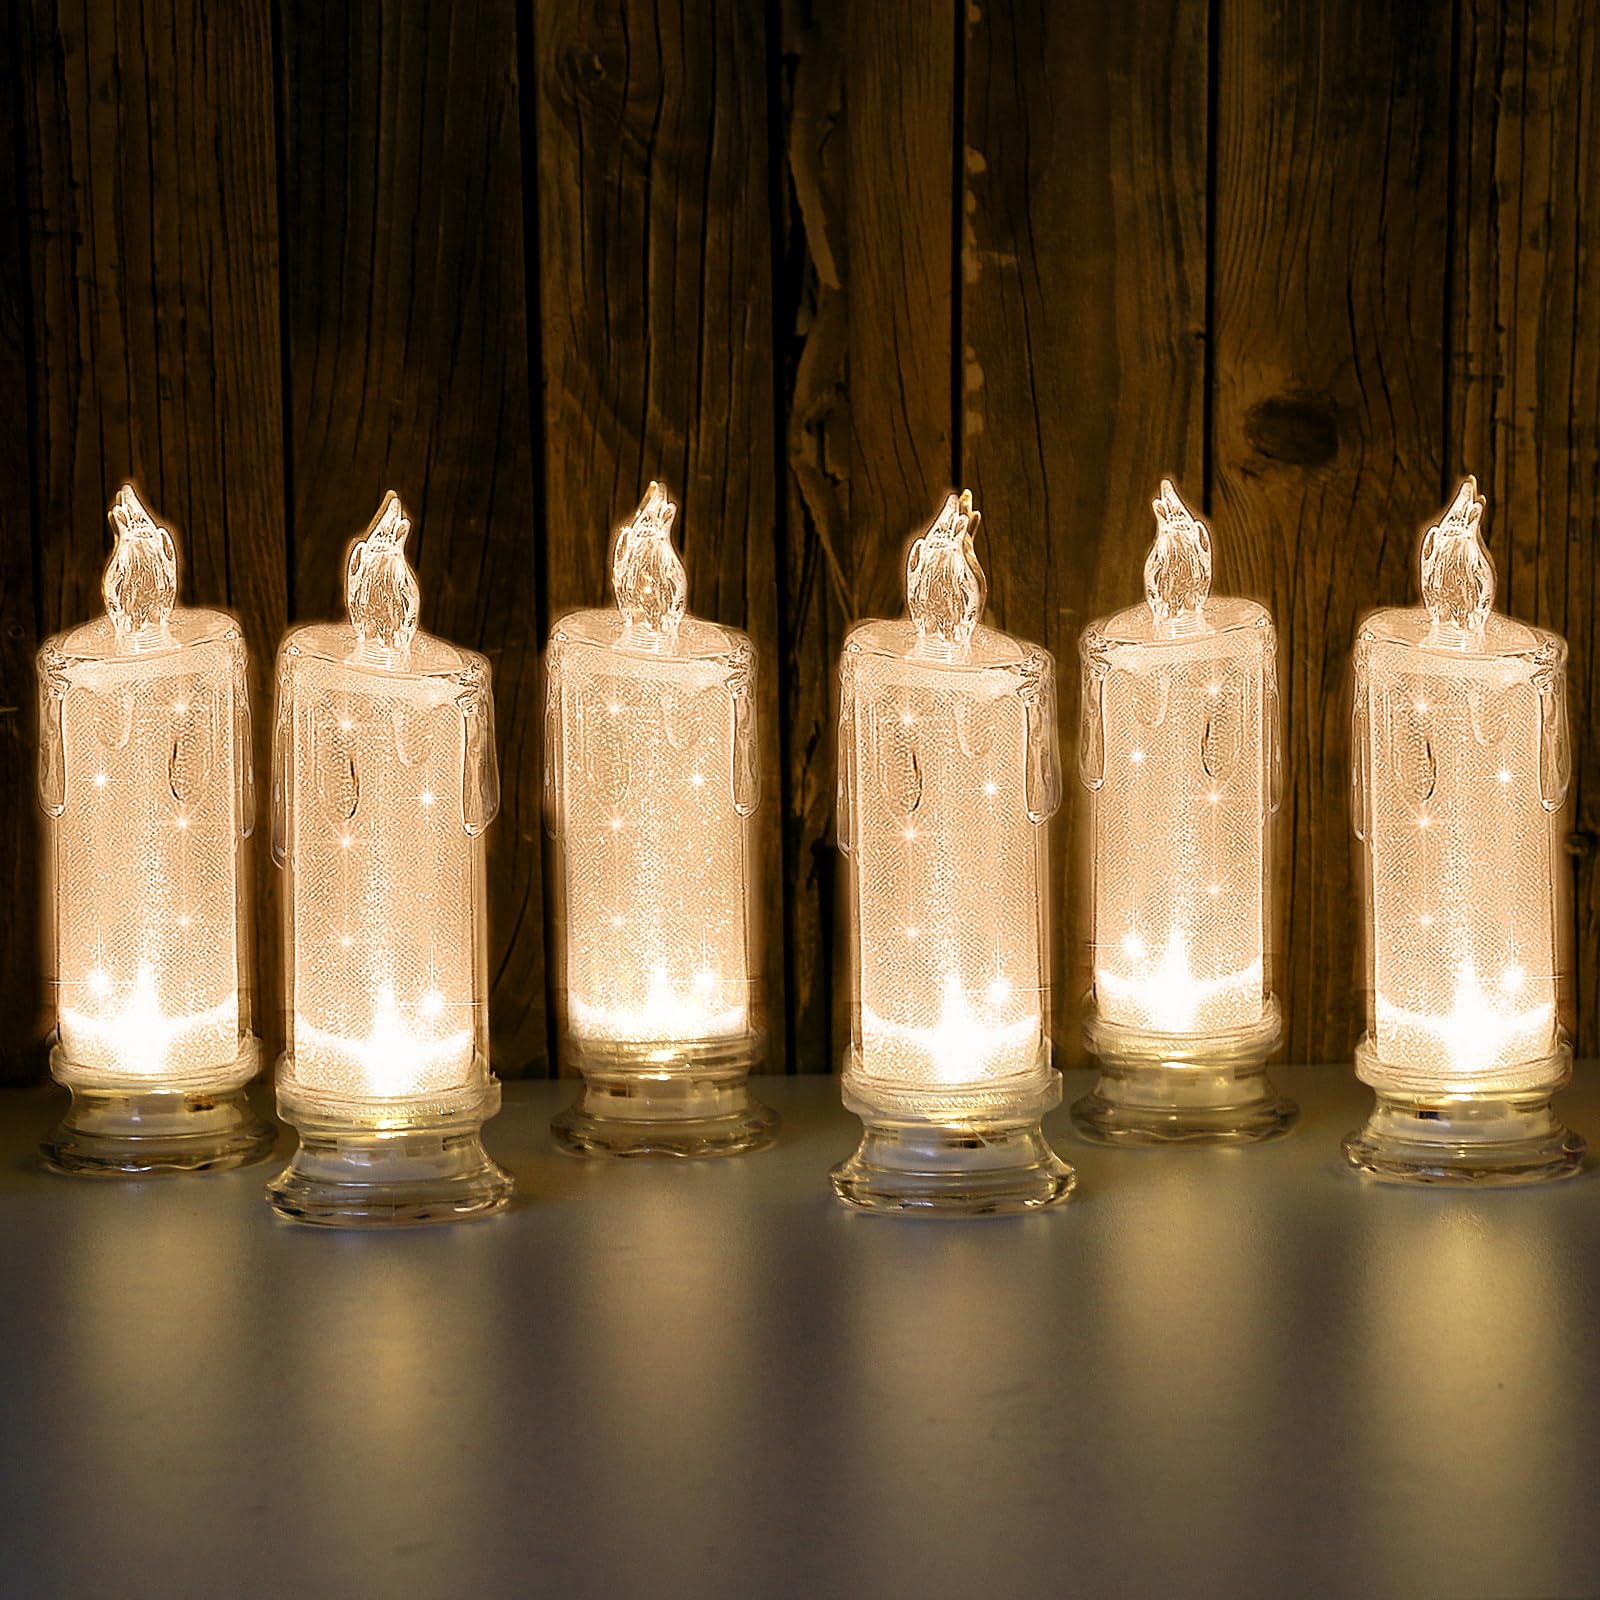 LACGO 6 PCS Mothers Day Gift Warm White LED Flameless Candles $14.31